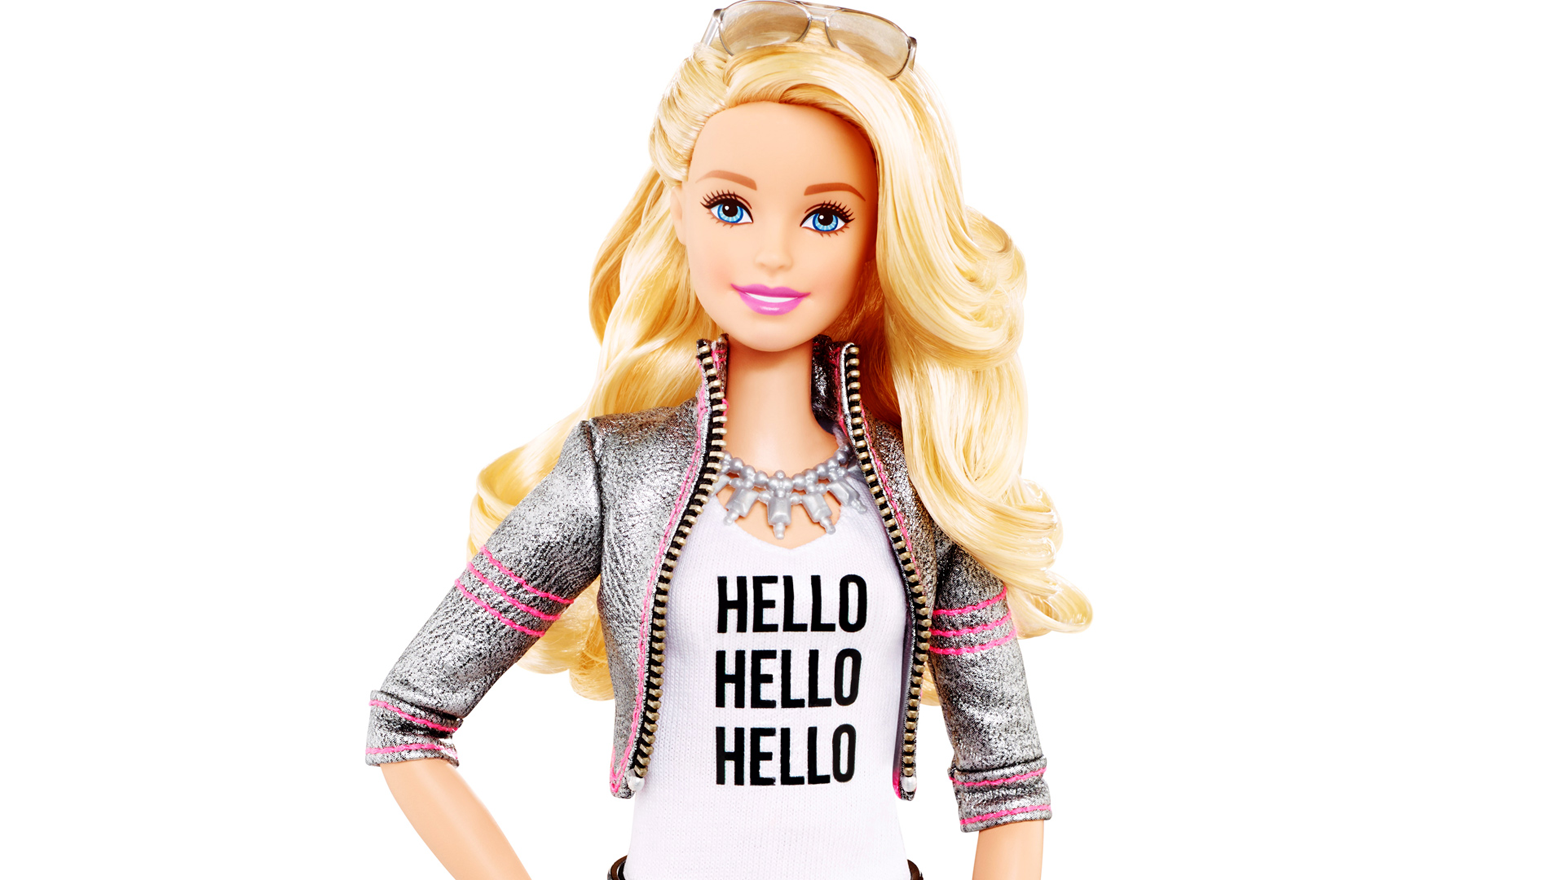 Hello Barbie has a microphone, speaker, and WiFi connection